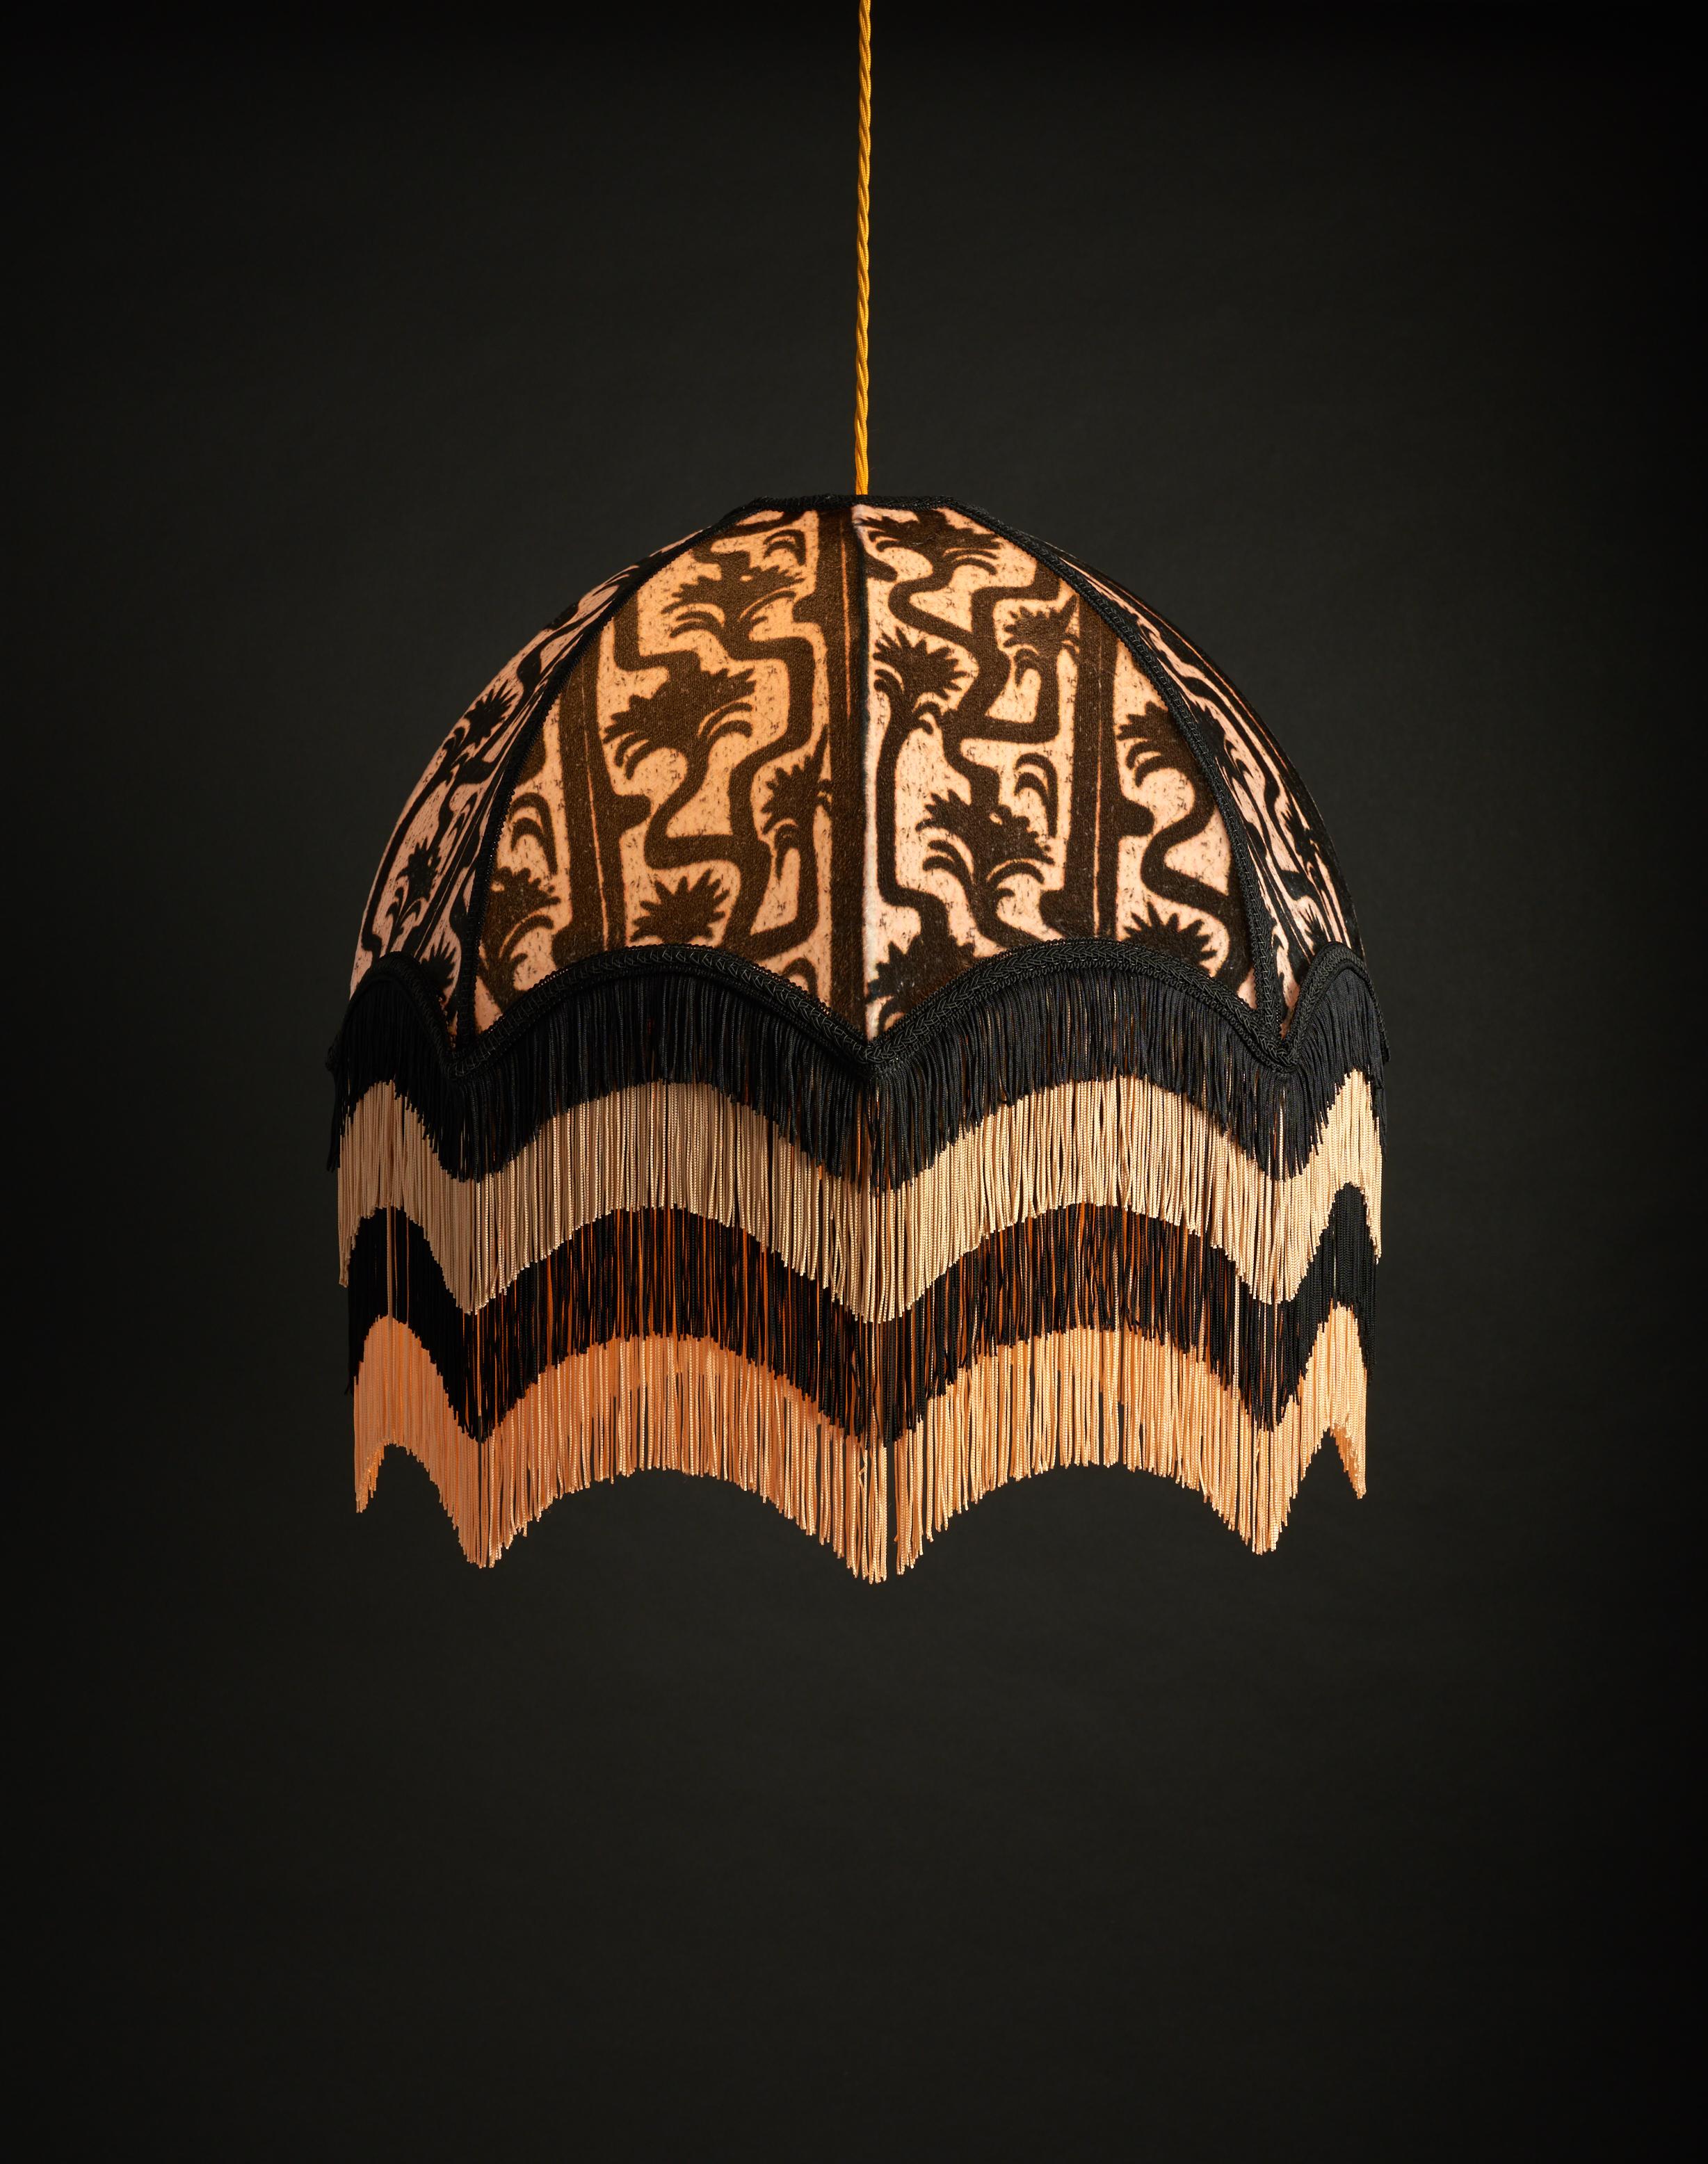 Puzzle was created as a linoprint which has been digitally worked into an offbeat meandering tree pattern. In tones of soft black and blush with four layers of decadent fringe.

Anna Hayman lampshades create a fantastic centrepiece to a room and